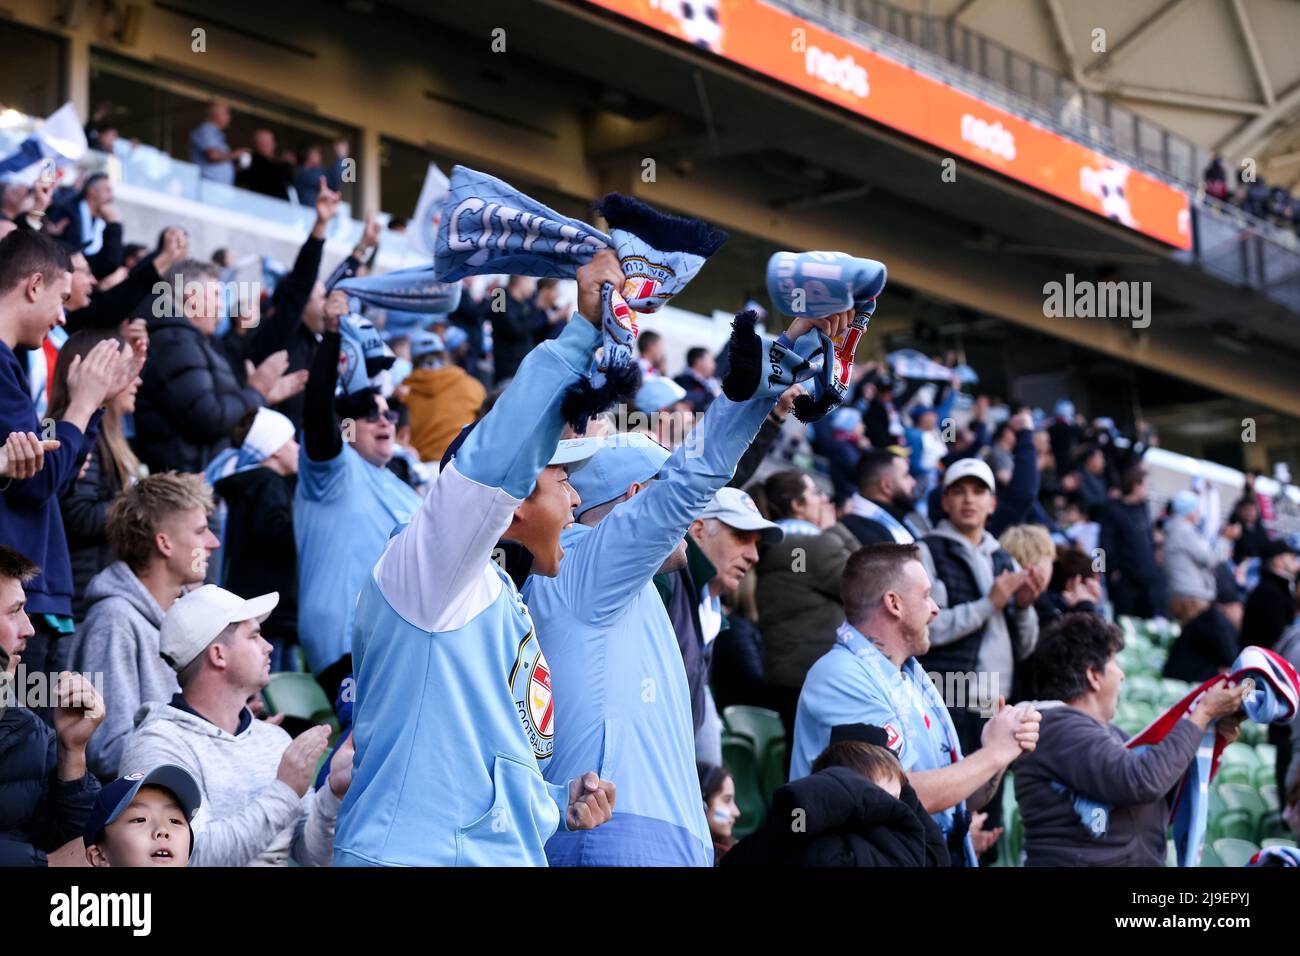 Melbourne, Australia, 22 May, 2022. Melbourne City fans cheer during the A-League Semi Final soccer match between Melbourne City FC and Adelaide United at AAMI Park on May 22, 2022 in Melbourne, Australia. Credit: Dave Hewison/Speed Media/Alamy Live News Stock Photo